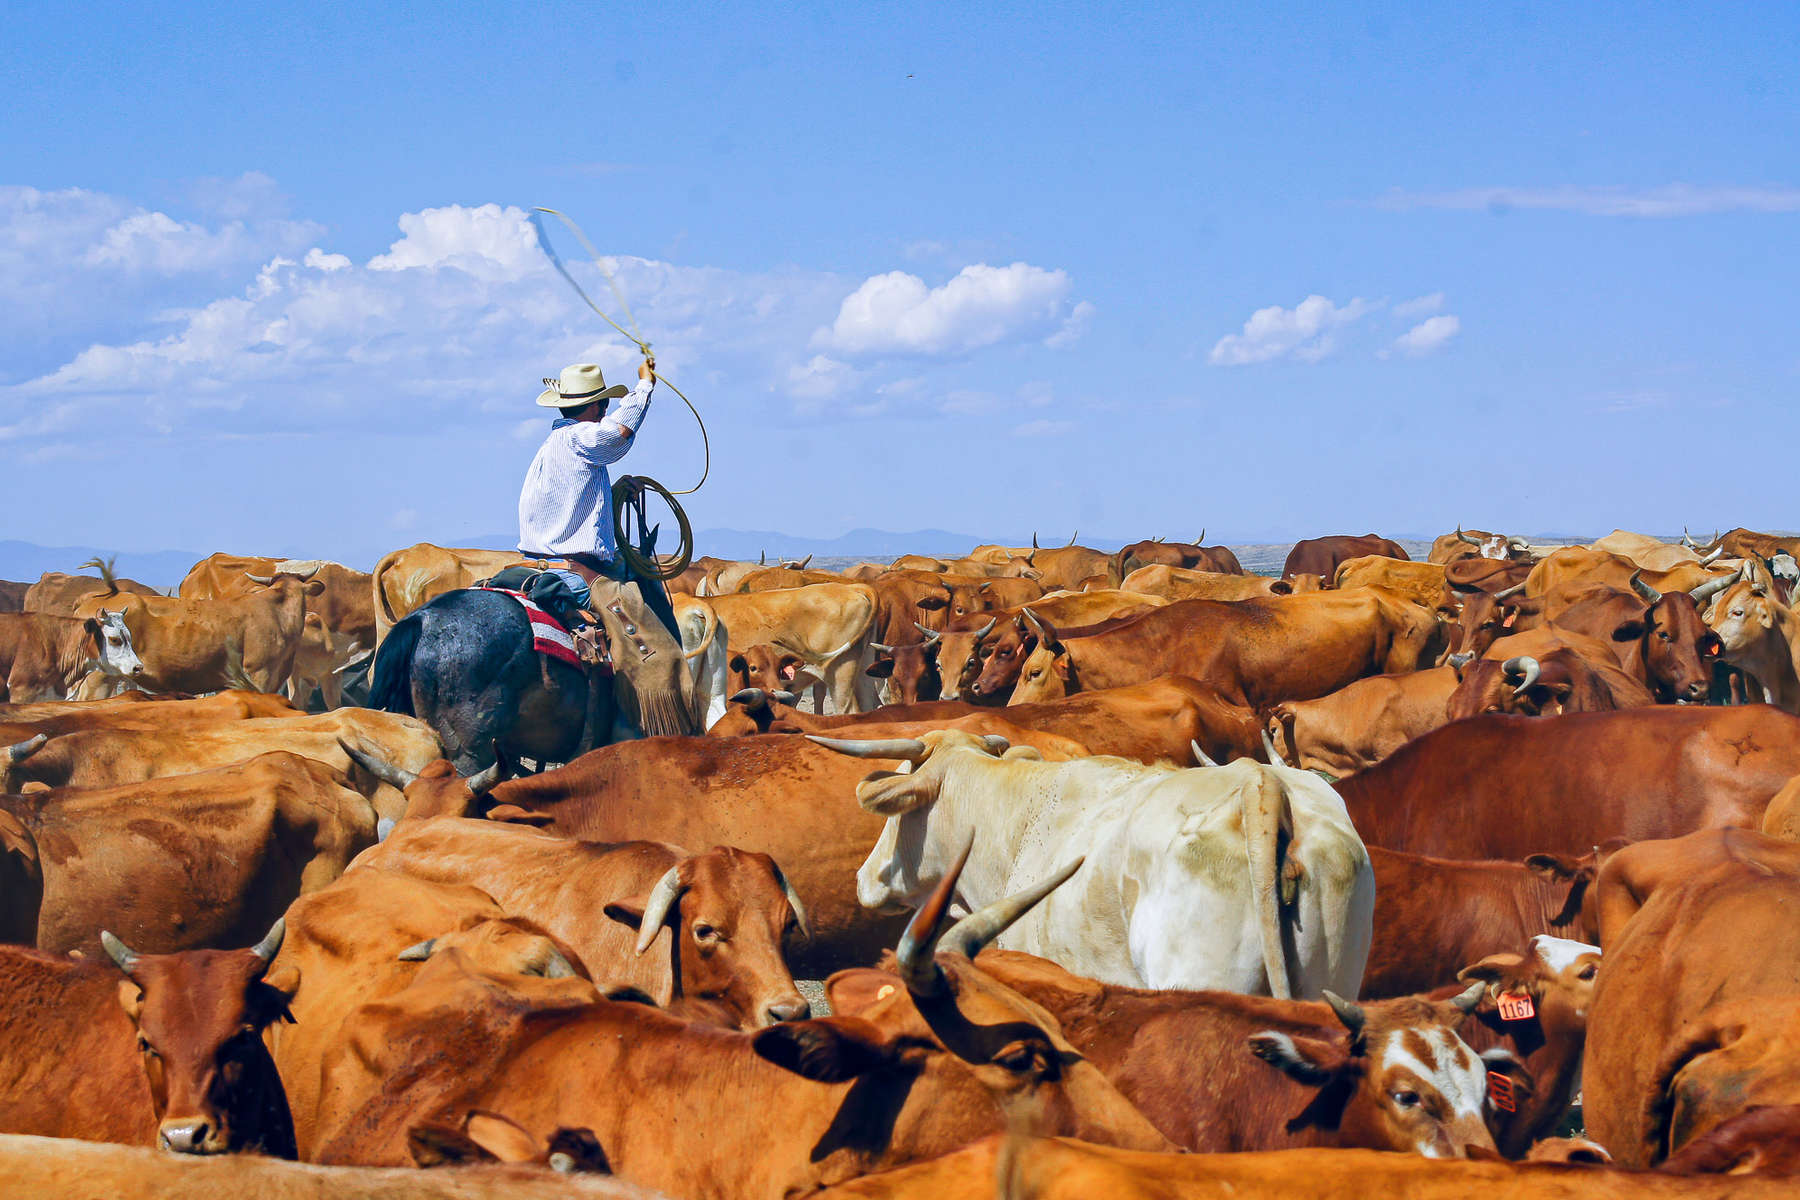 Wrangler roping cattle at a US working ranch